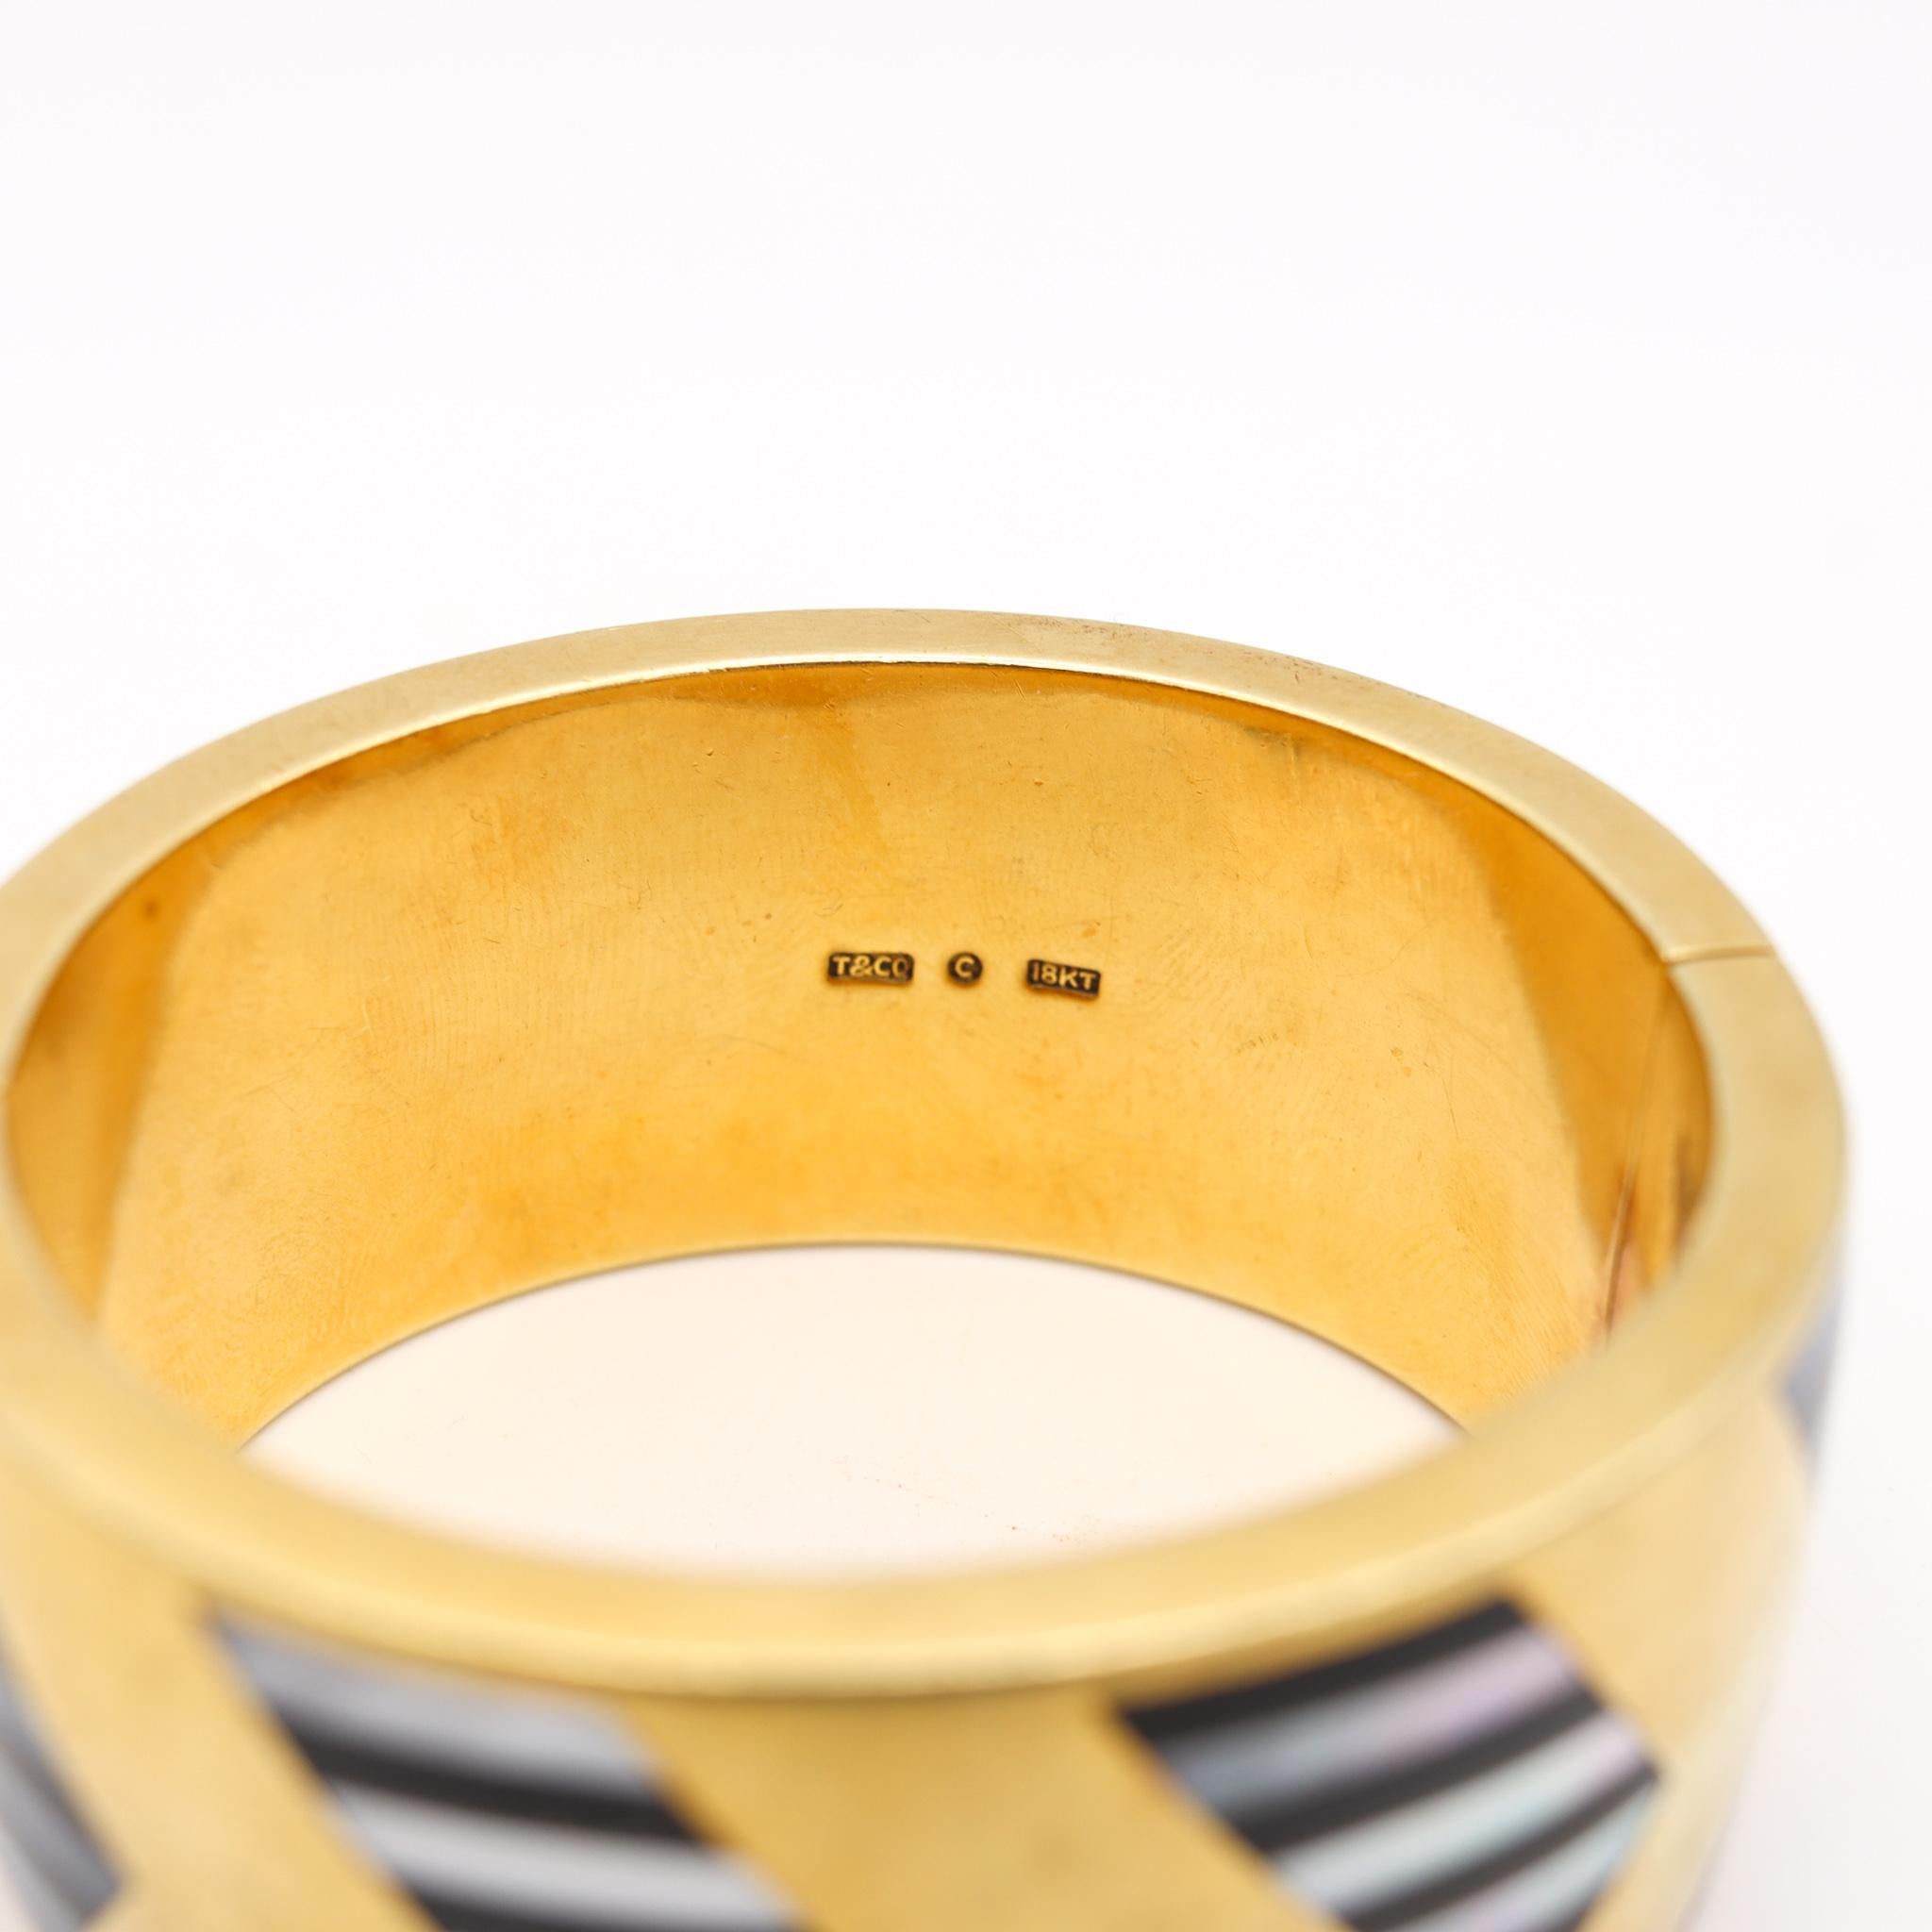 Tiffany & Co. 1978 Angela Cummings Geometric Bangle in 18Kt Gold with InlaidGems In Excellent Condition For Sale In Miami, FL